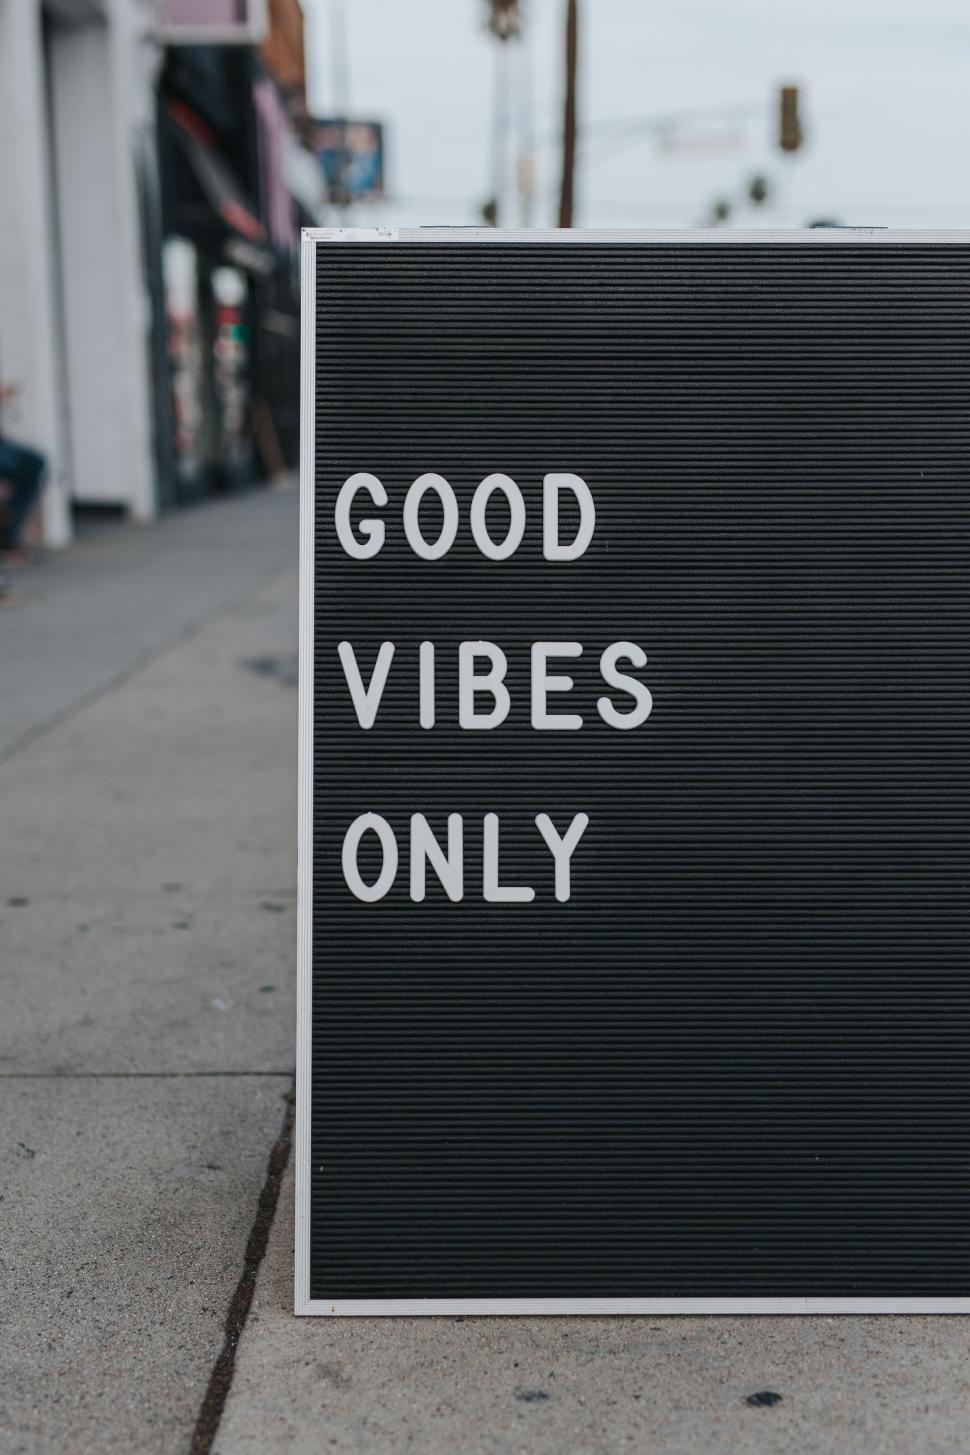 Free Image of Good Vibes Only Sign on Sidewalk 